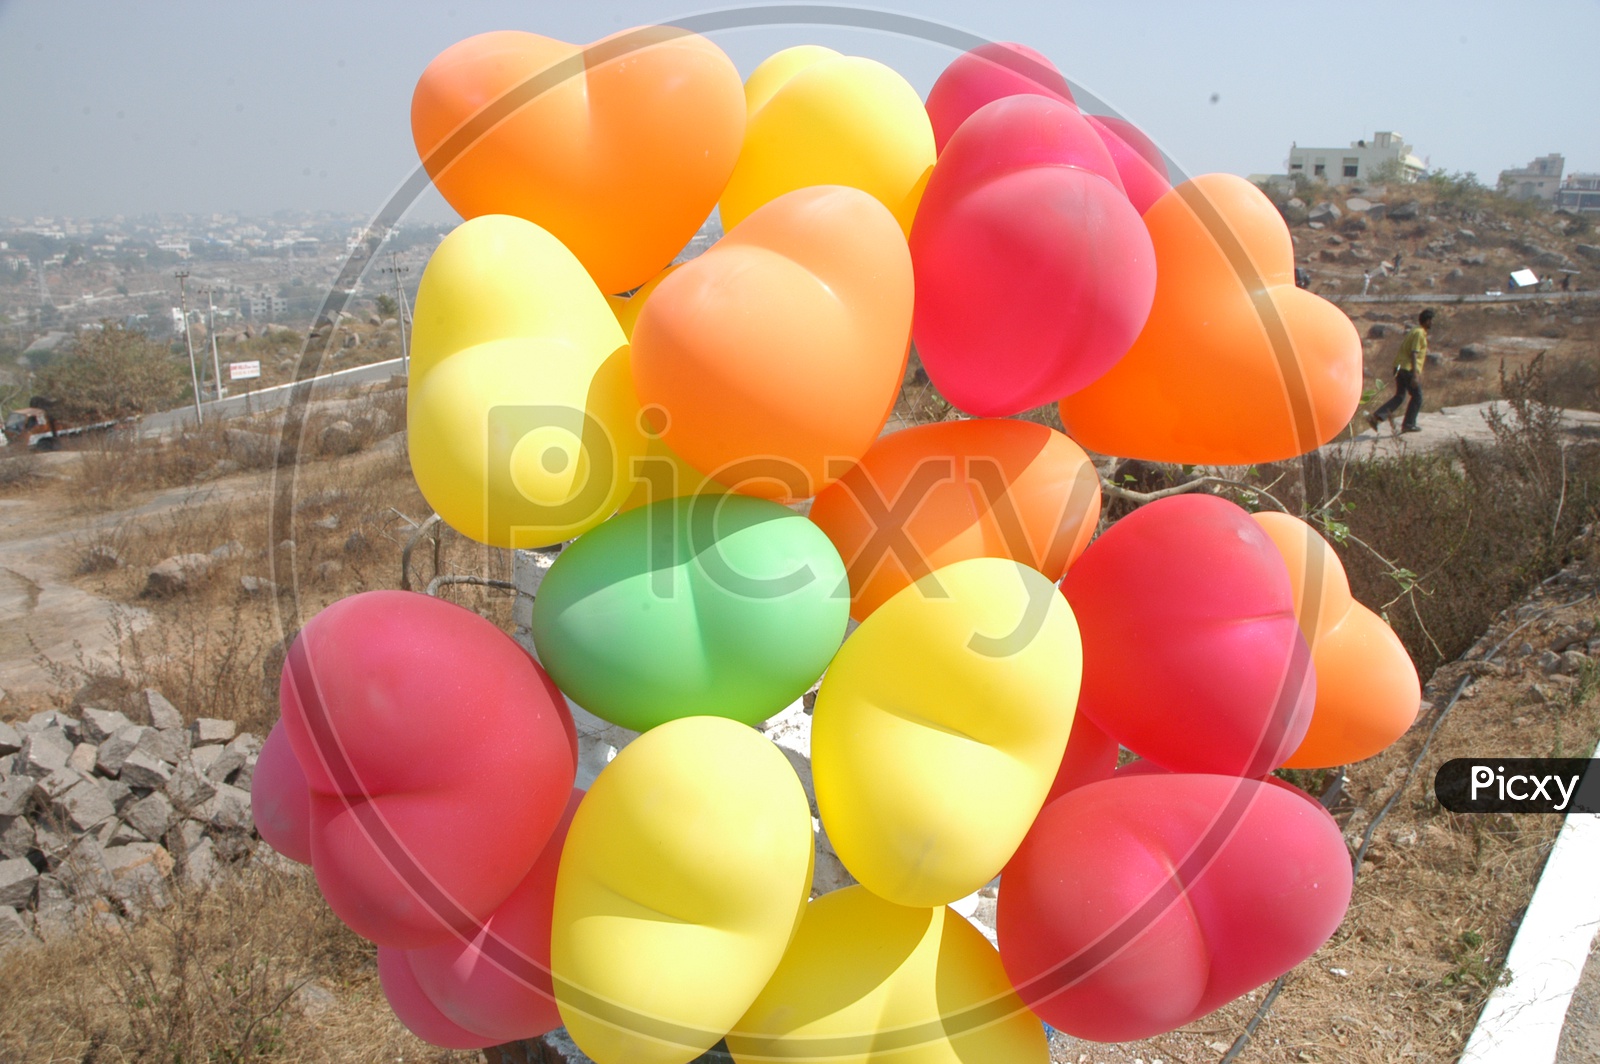 Colorful heart shaped balloons